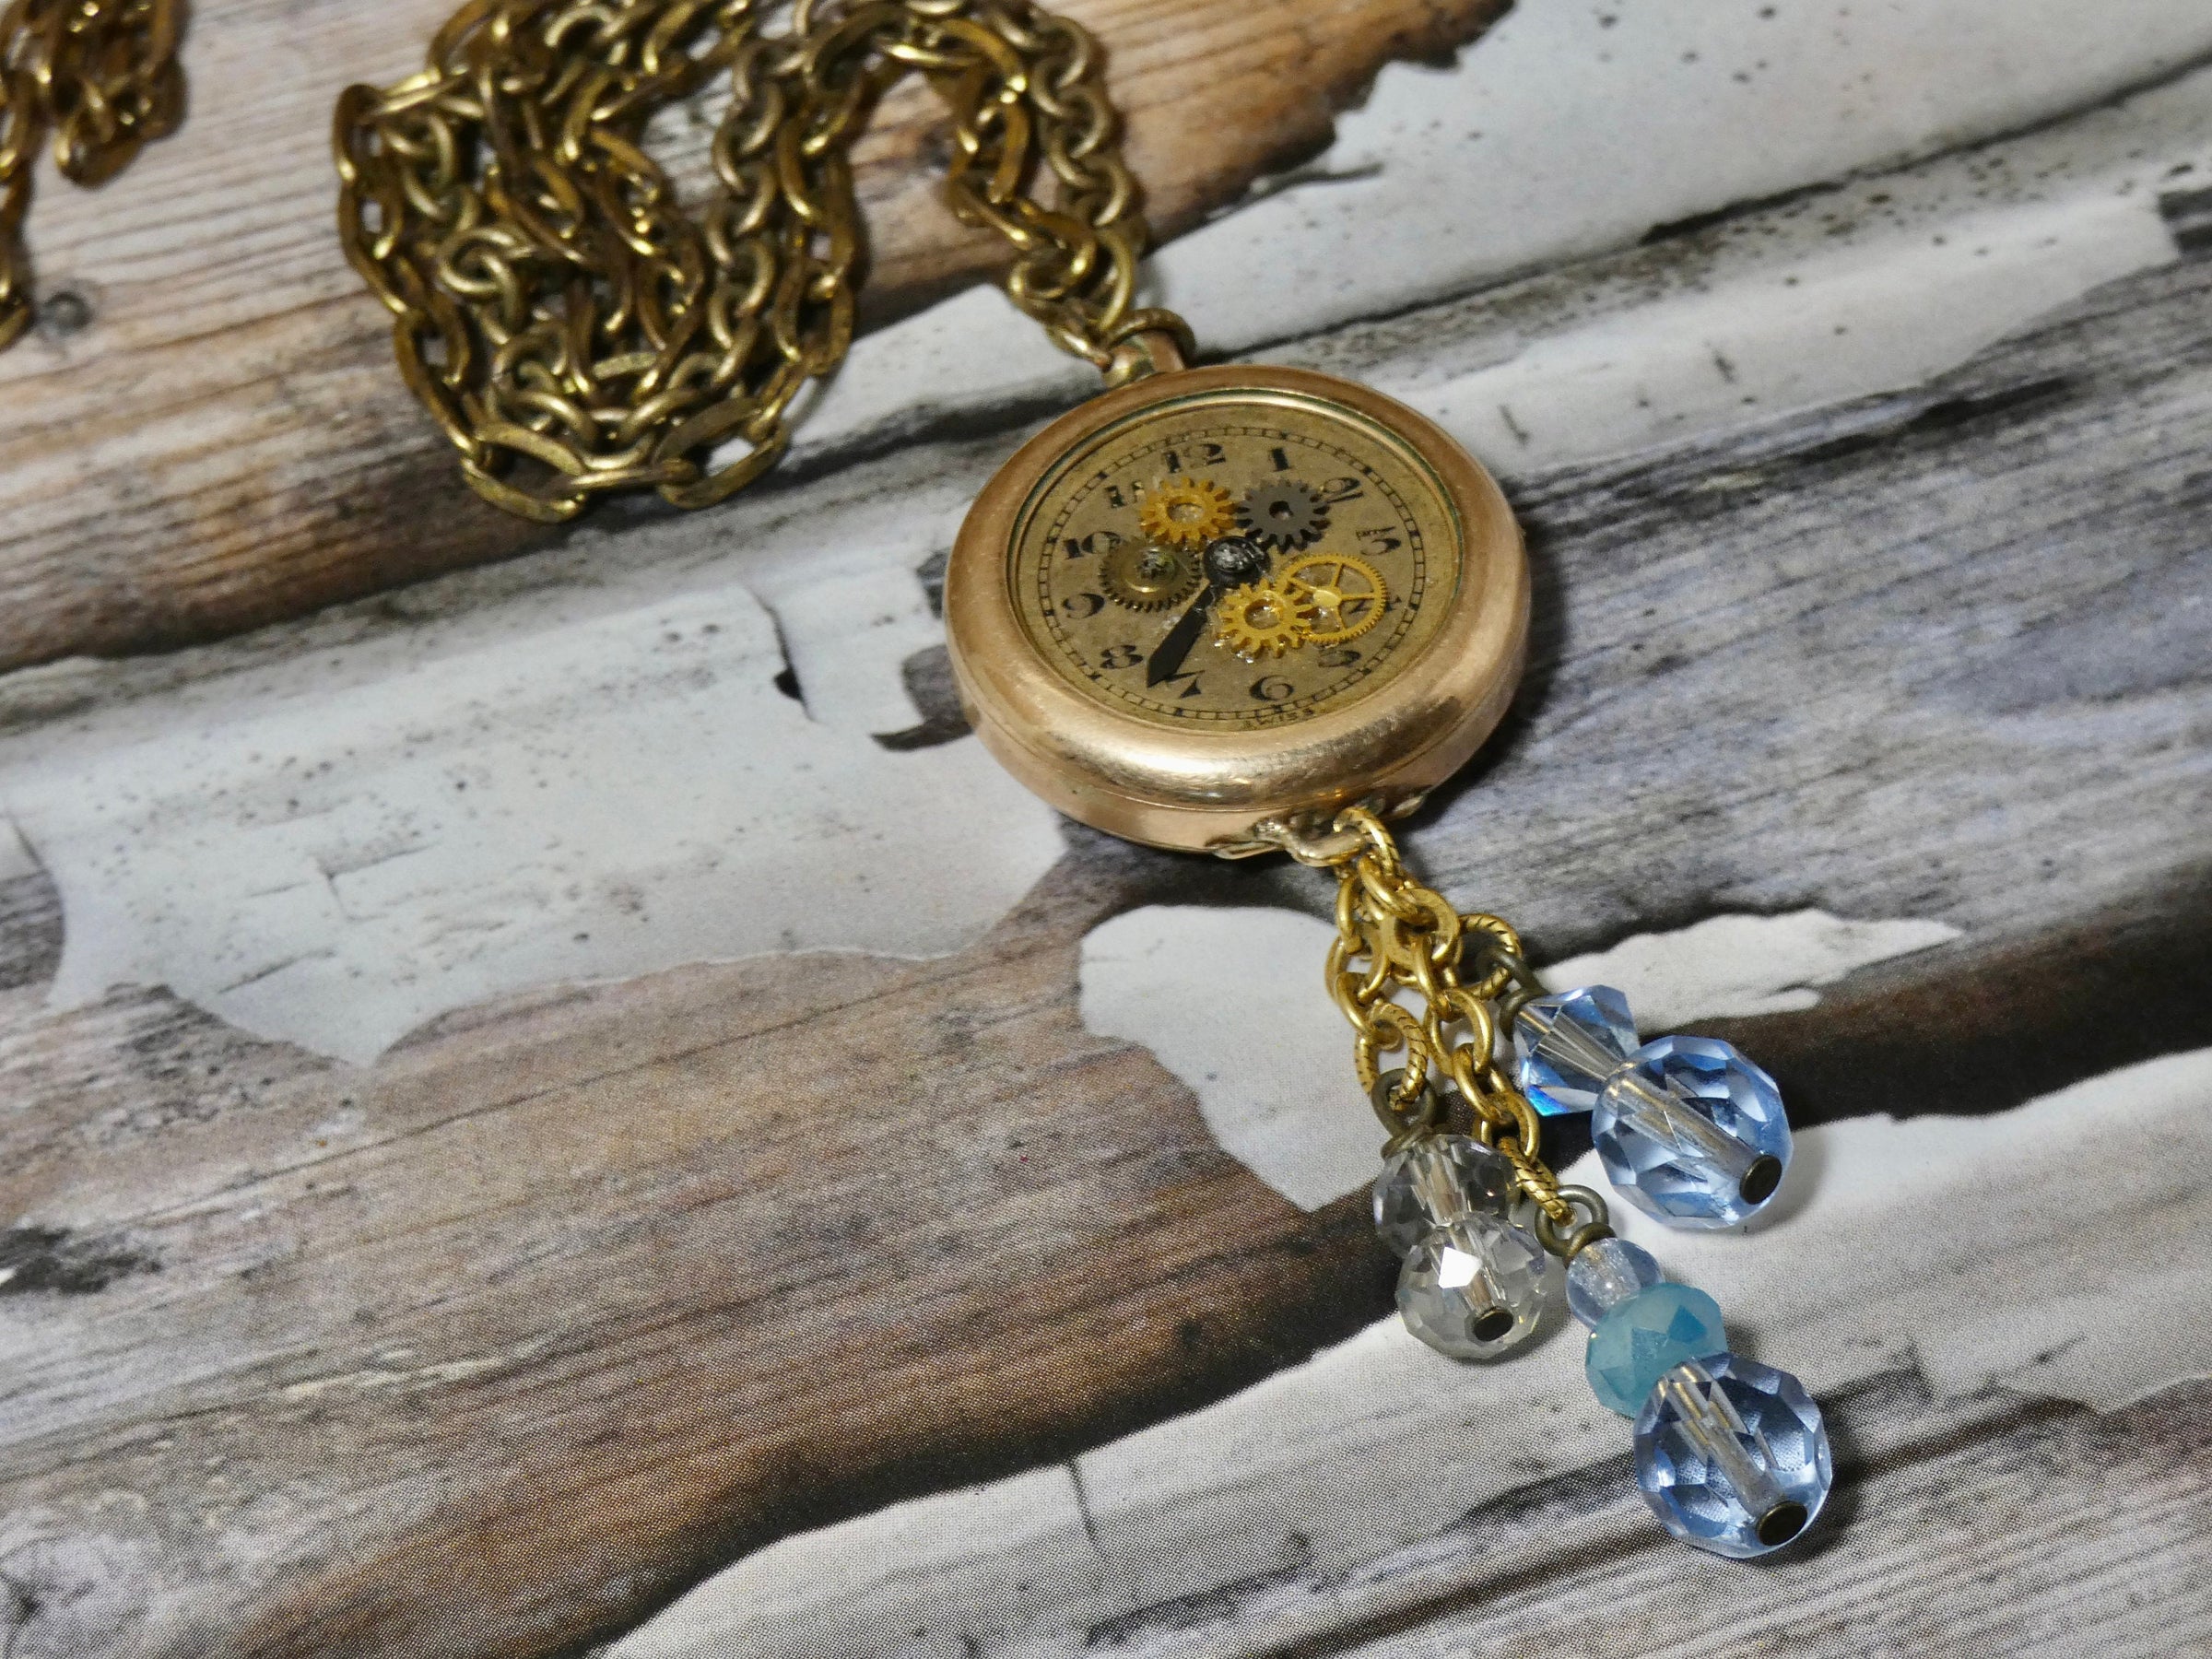 Steampunk Altered Women's Watch Necklace, Open Face with Gears and Parts